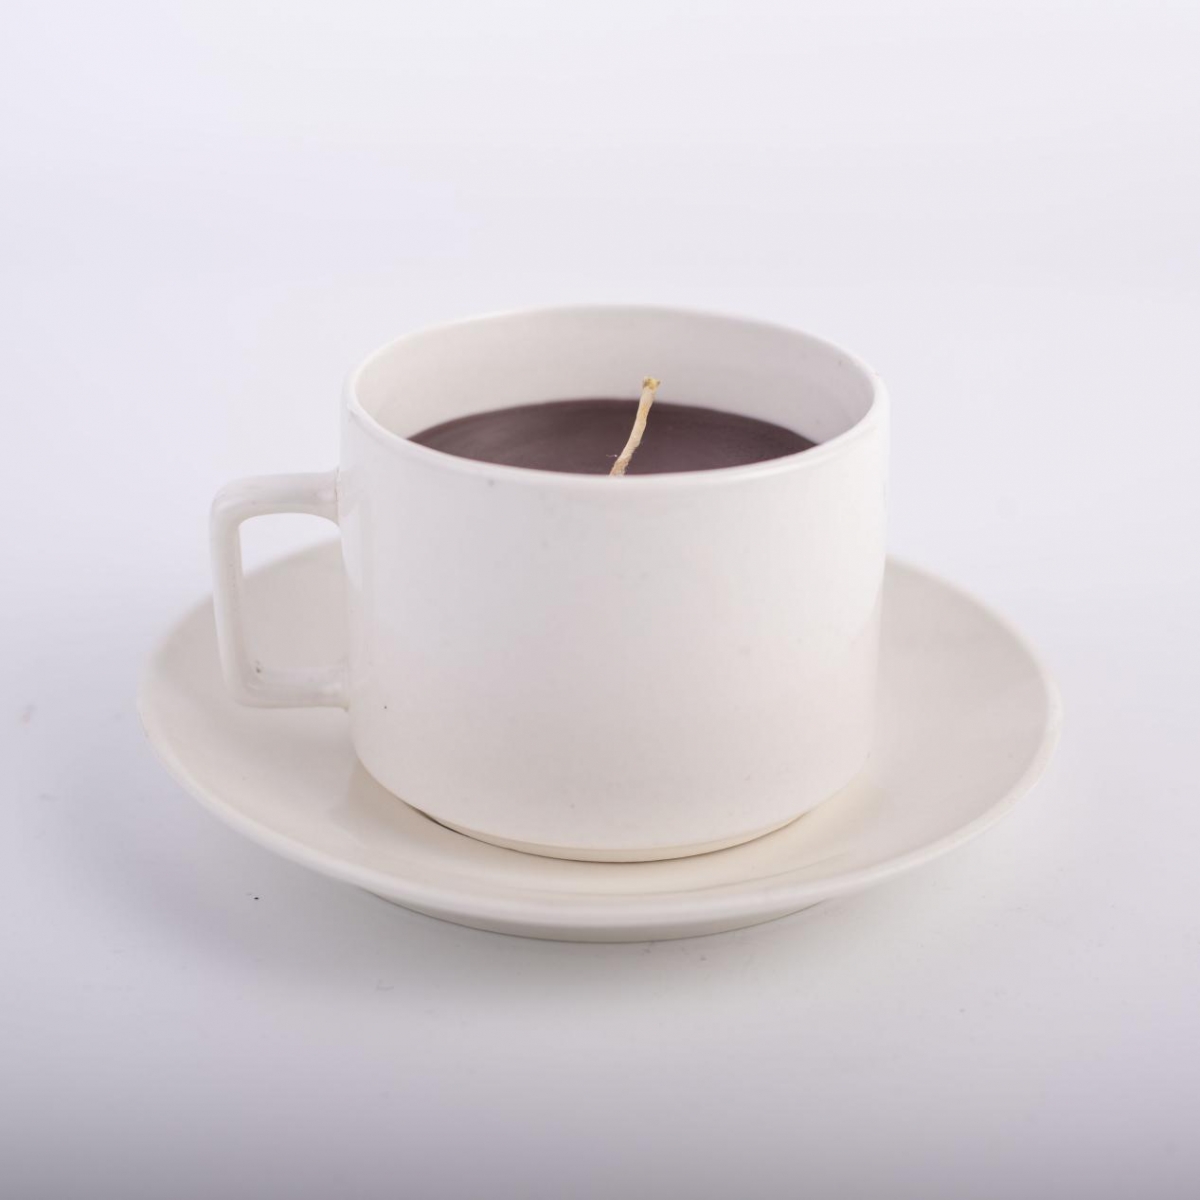 Espresso Candles : White Ceramic ,Cup and Plate Set, Coffee Candles, Table Centerpiece ,China Factory ,Price-HOWCANDLE-Candles,Scented Candles,Aromatherapy Candles,Soy Candles,Vegan Candles,Jar Candles,Pillar Candles,Candle Gift Sets,Essential Oils,Reed Diffuser,Candle Holder,